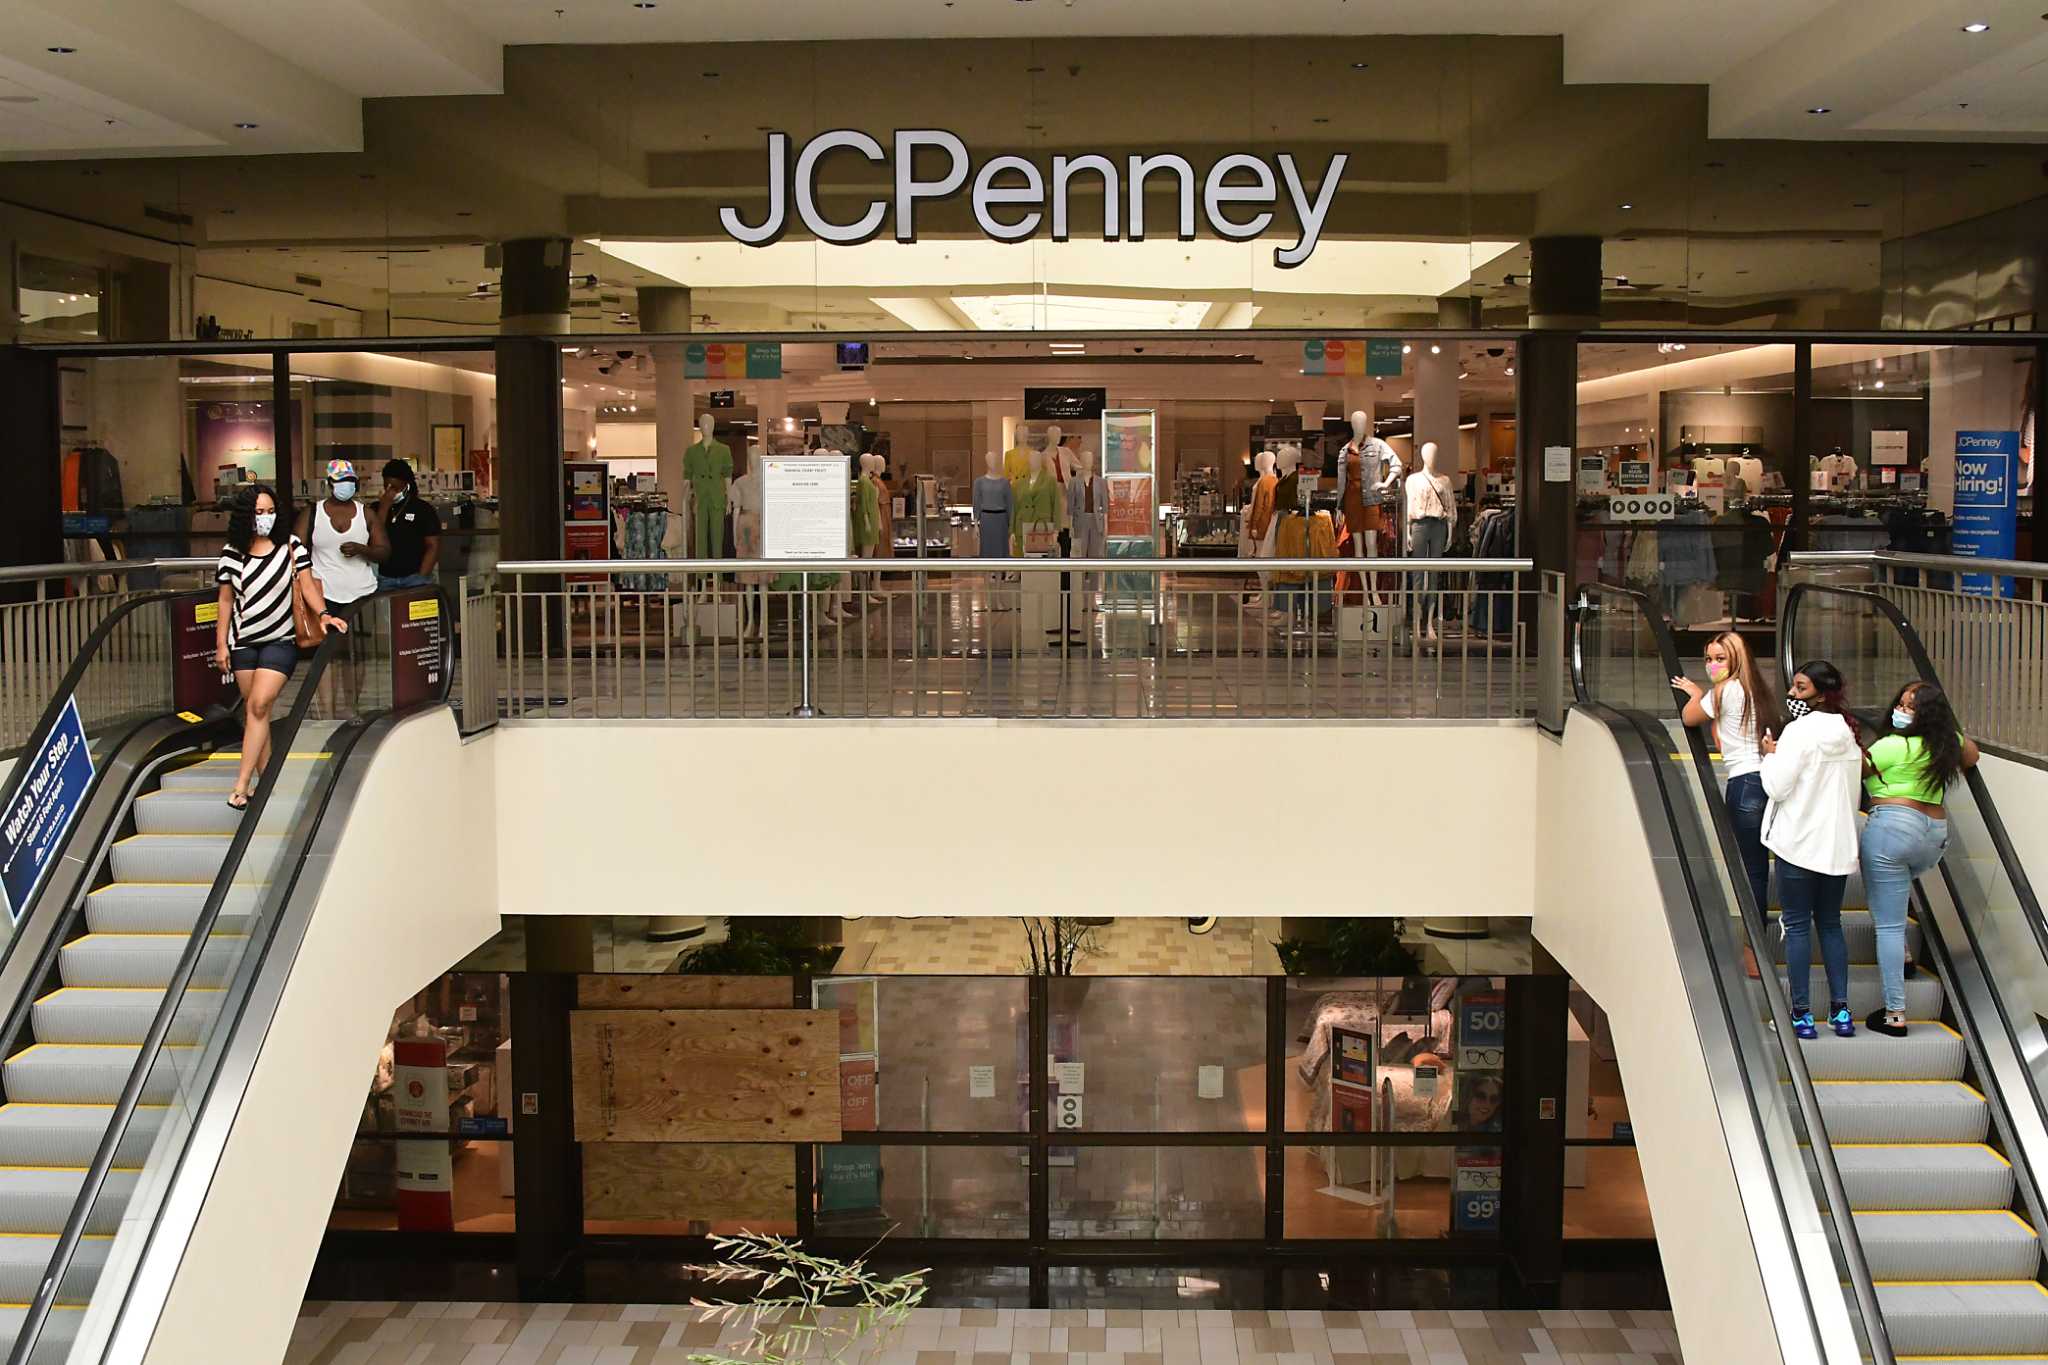 Crossgates Mall - Look out world! At the JCPenney